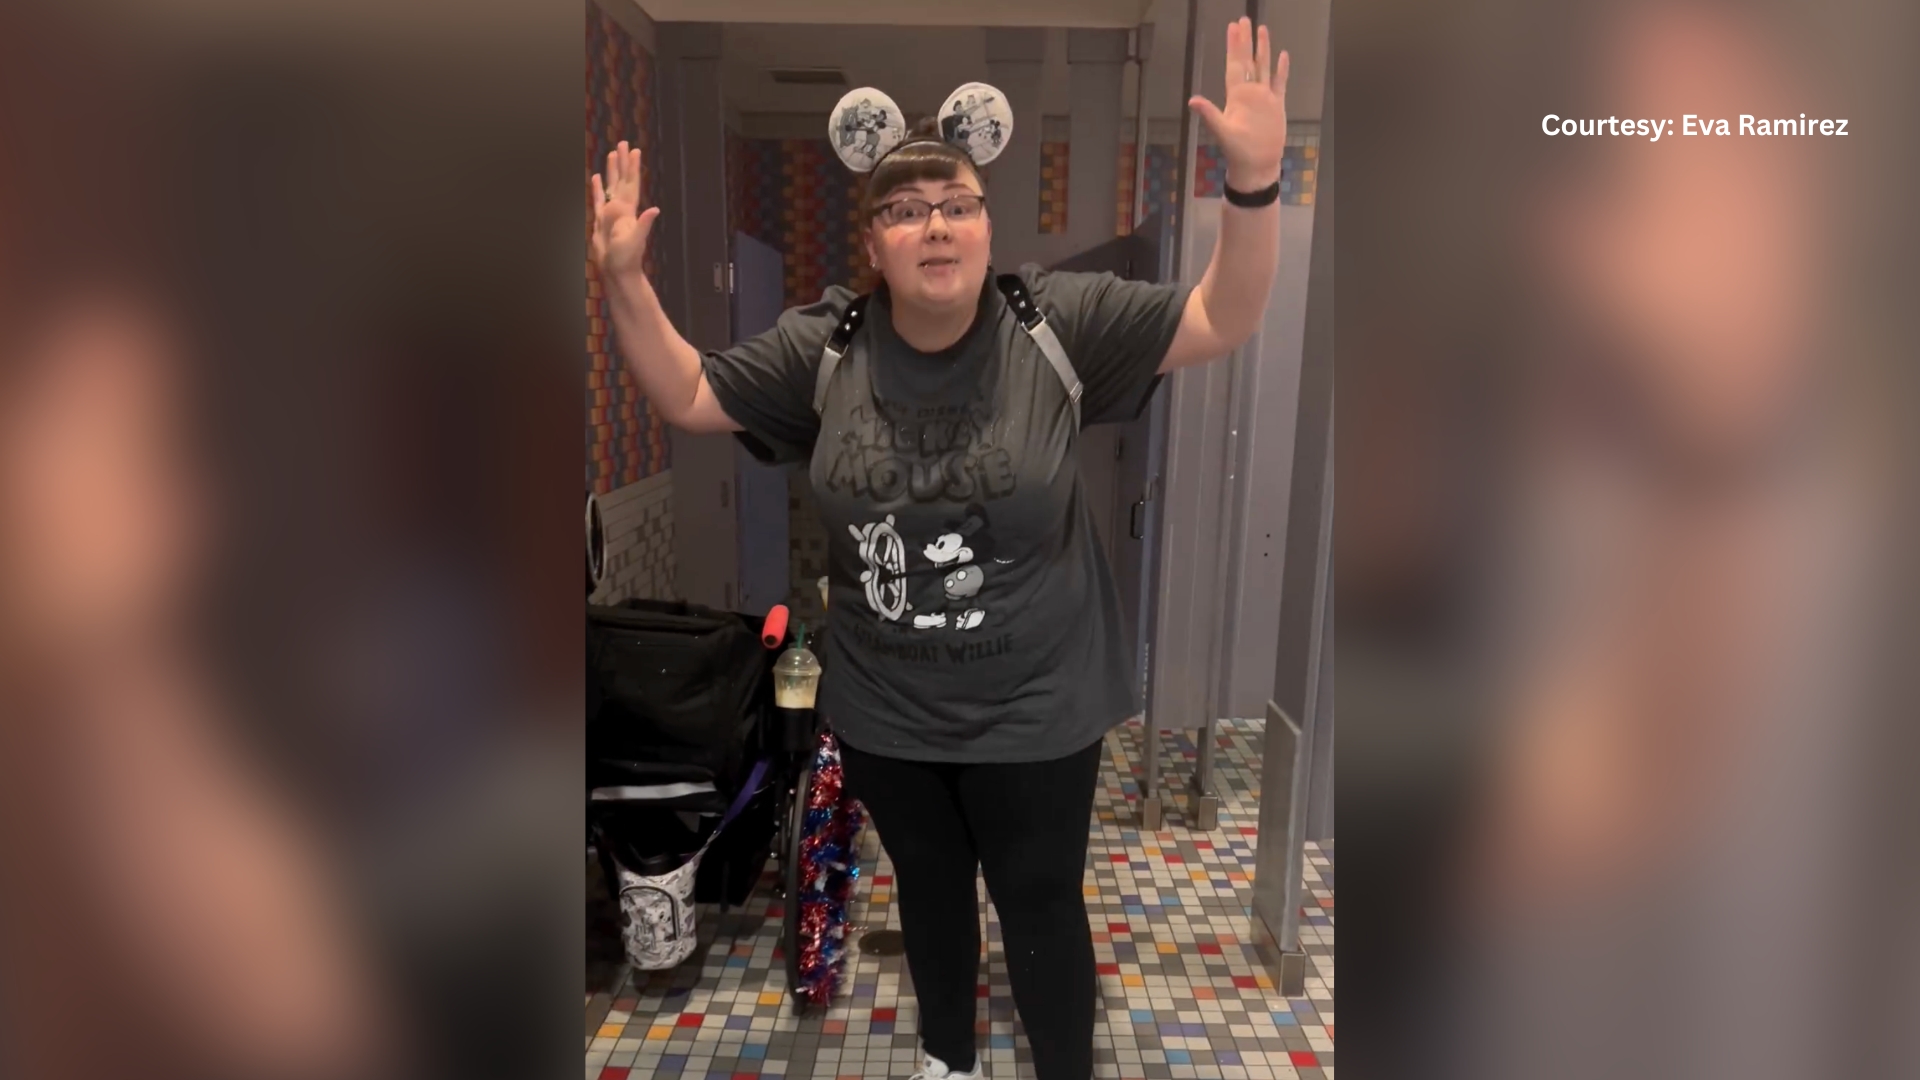 Woman caught on camera at Disneyland saying "I hate Mexicans"